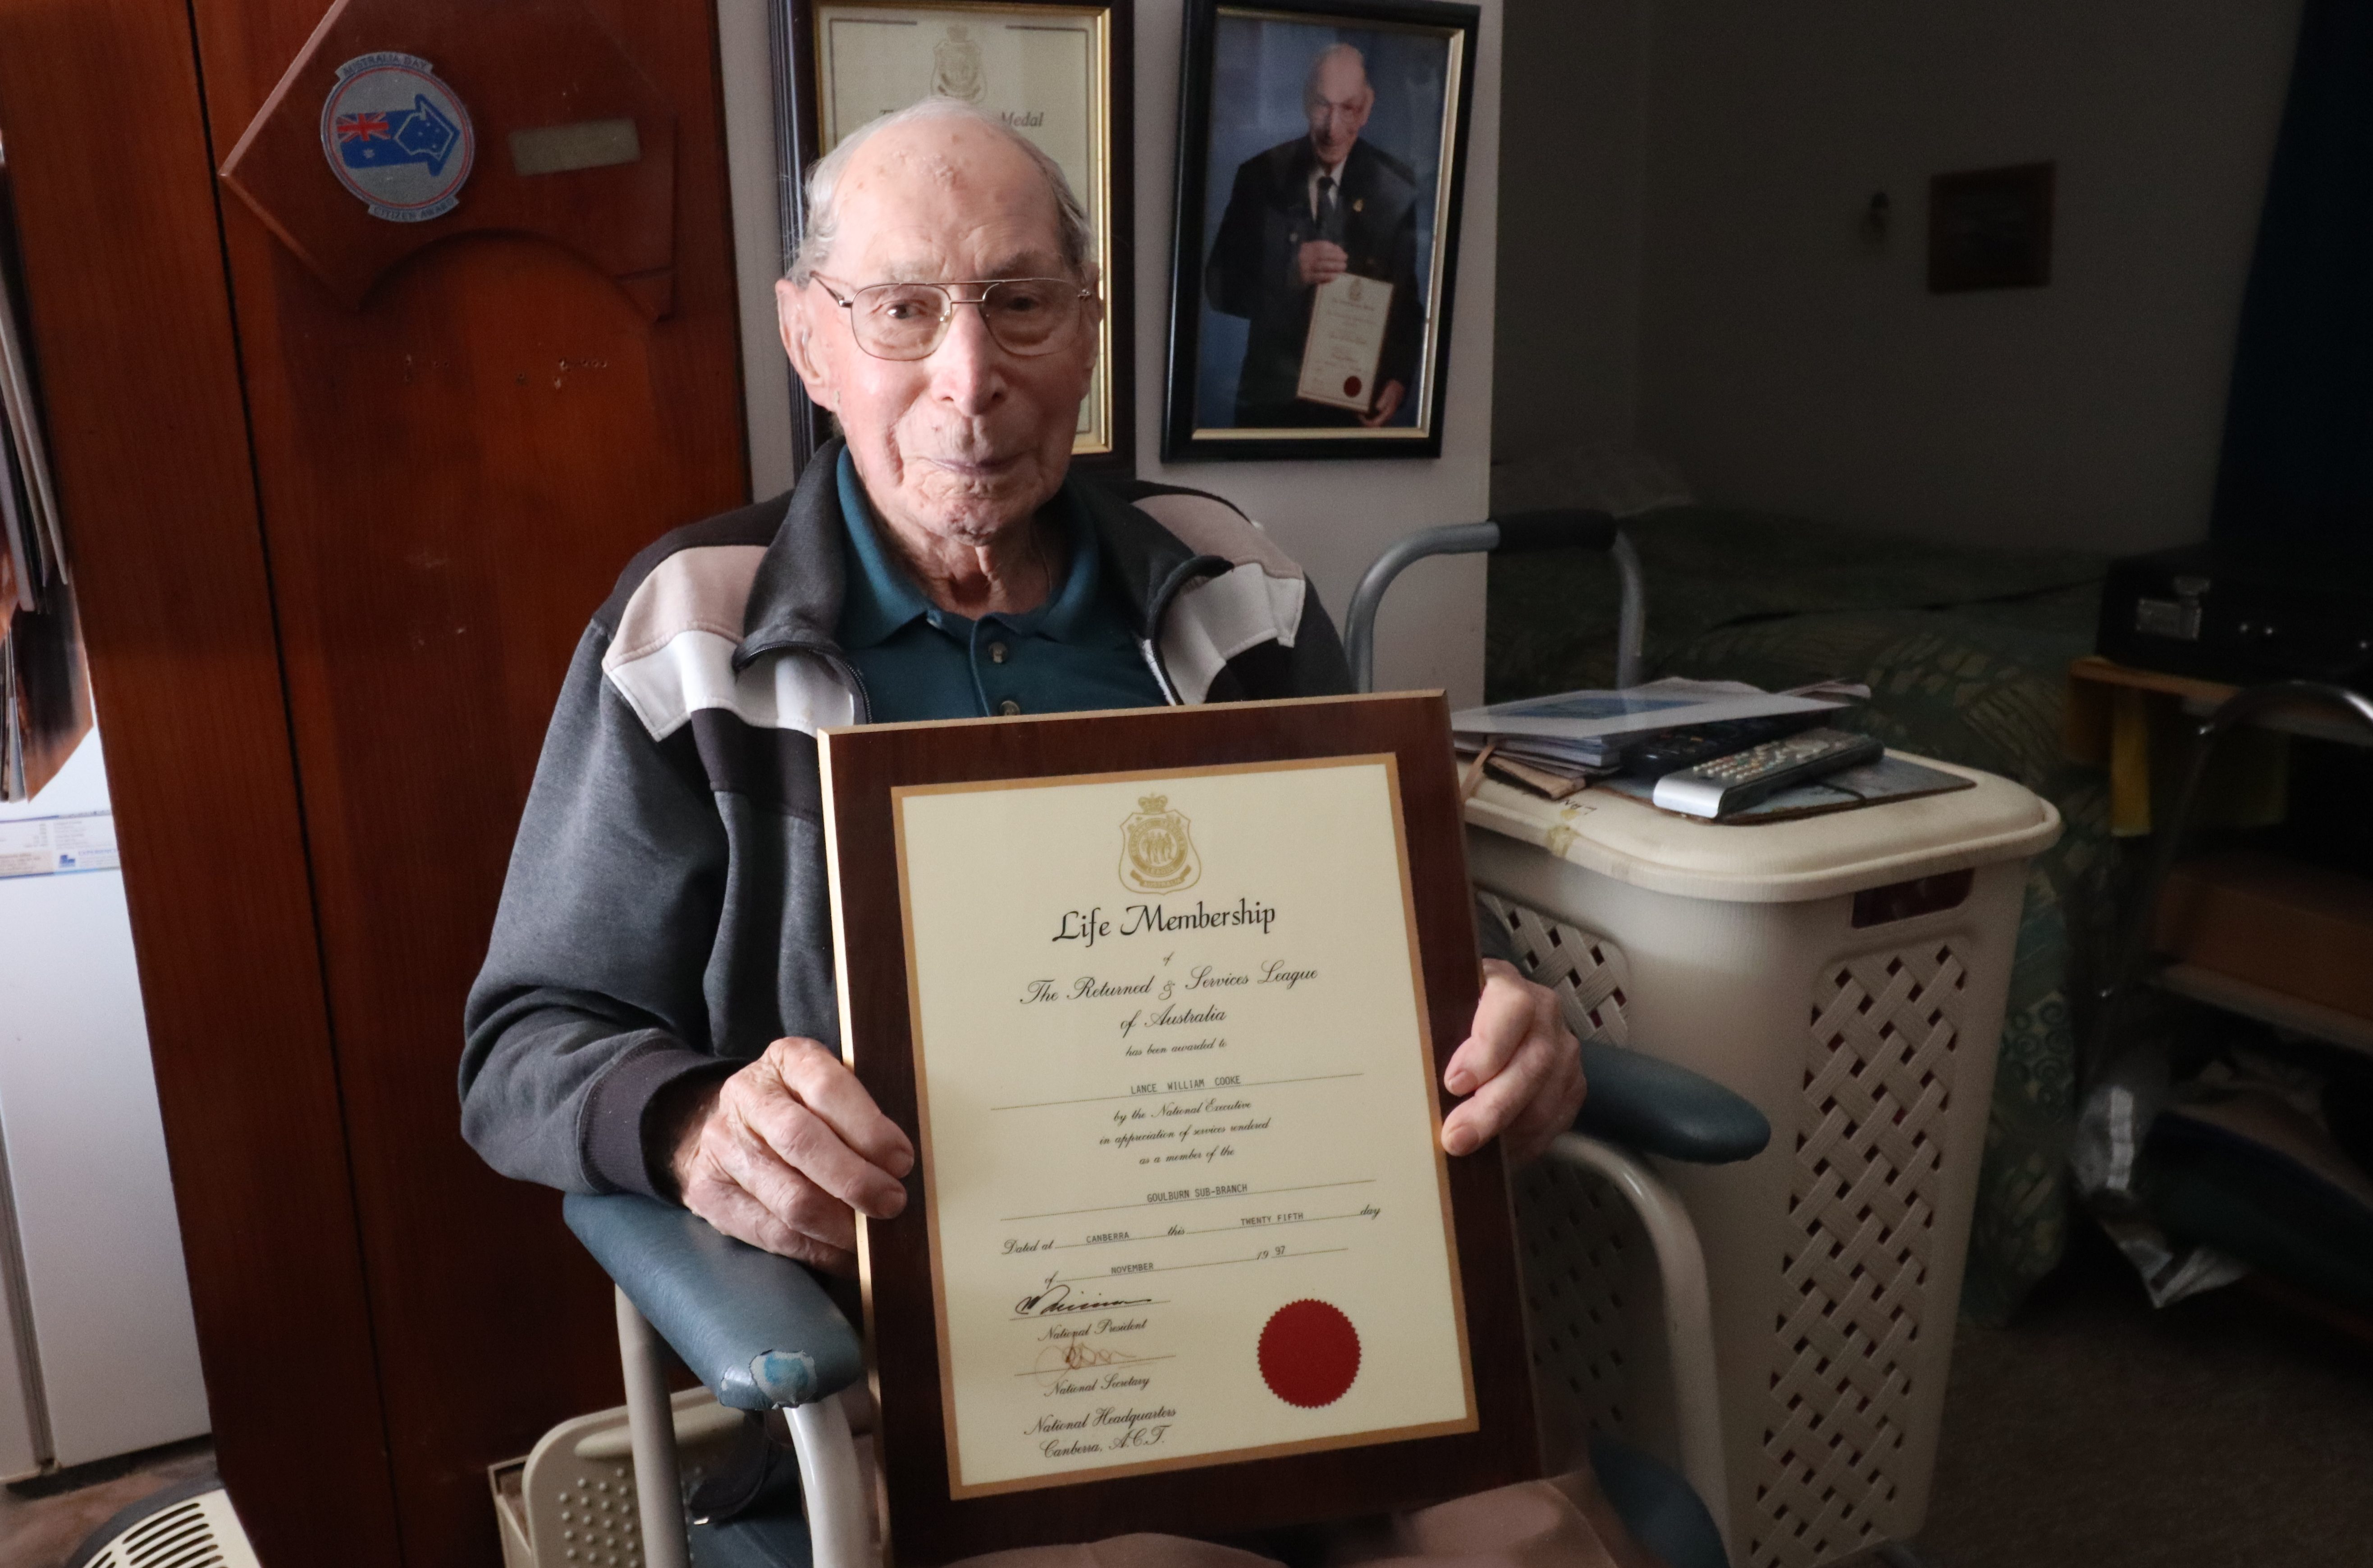 'It wasn't all beer and skittles': 96-year-old WWII veteran shares his story